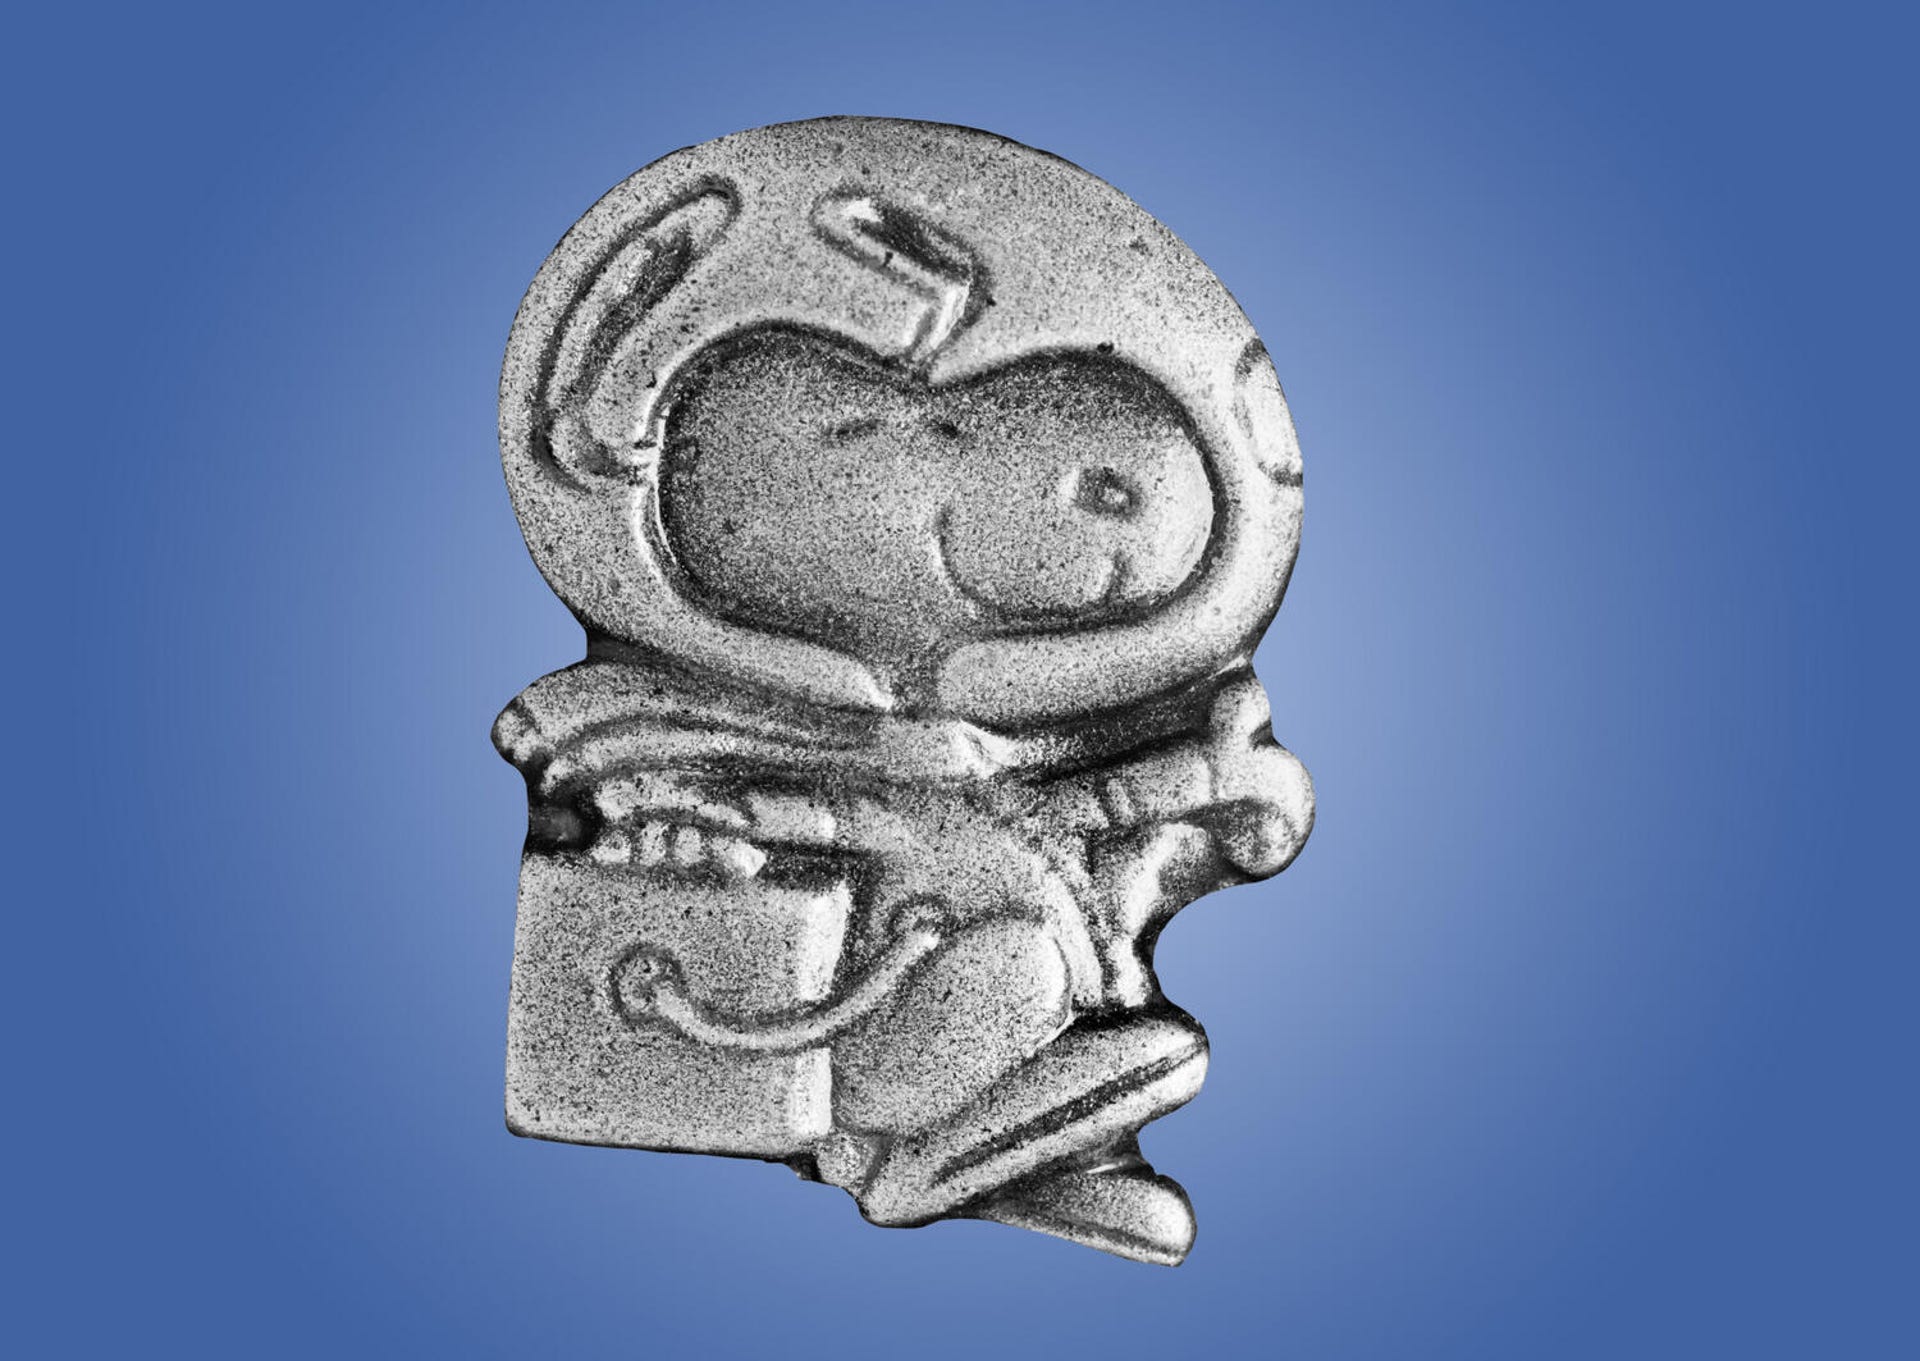 A silver pine representing Peanuts dog Snoopy wearing an astronaut outfit.